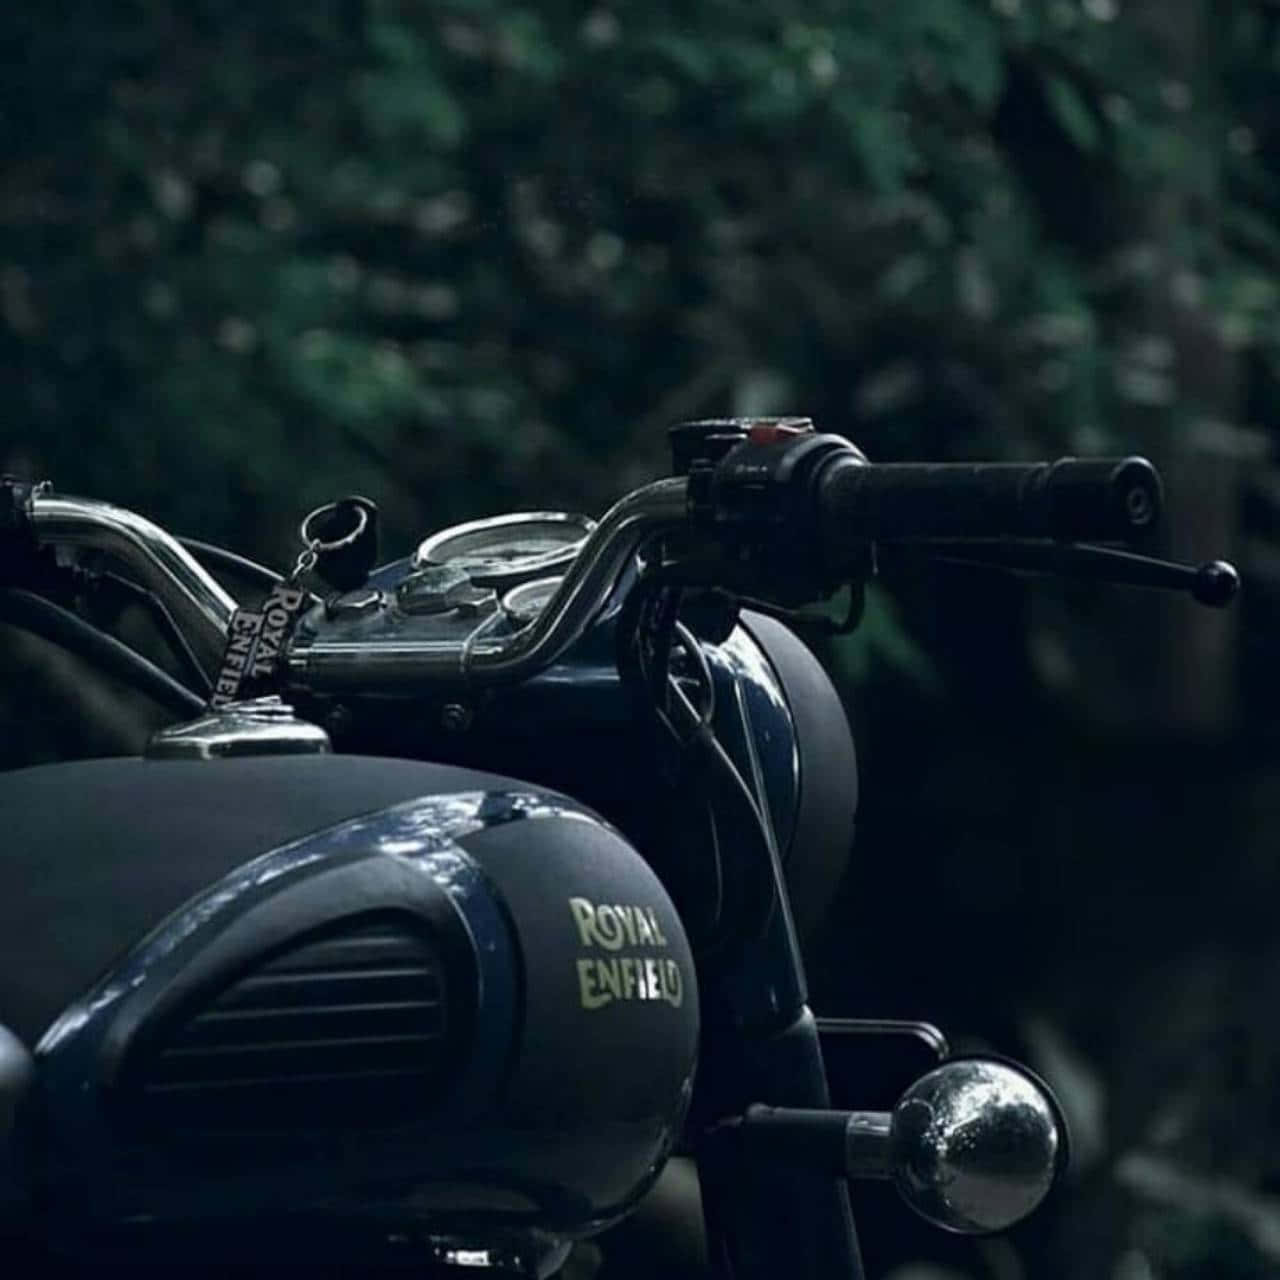 Feel the freedom of the ride with Royal Enfield Bullet